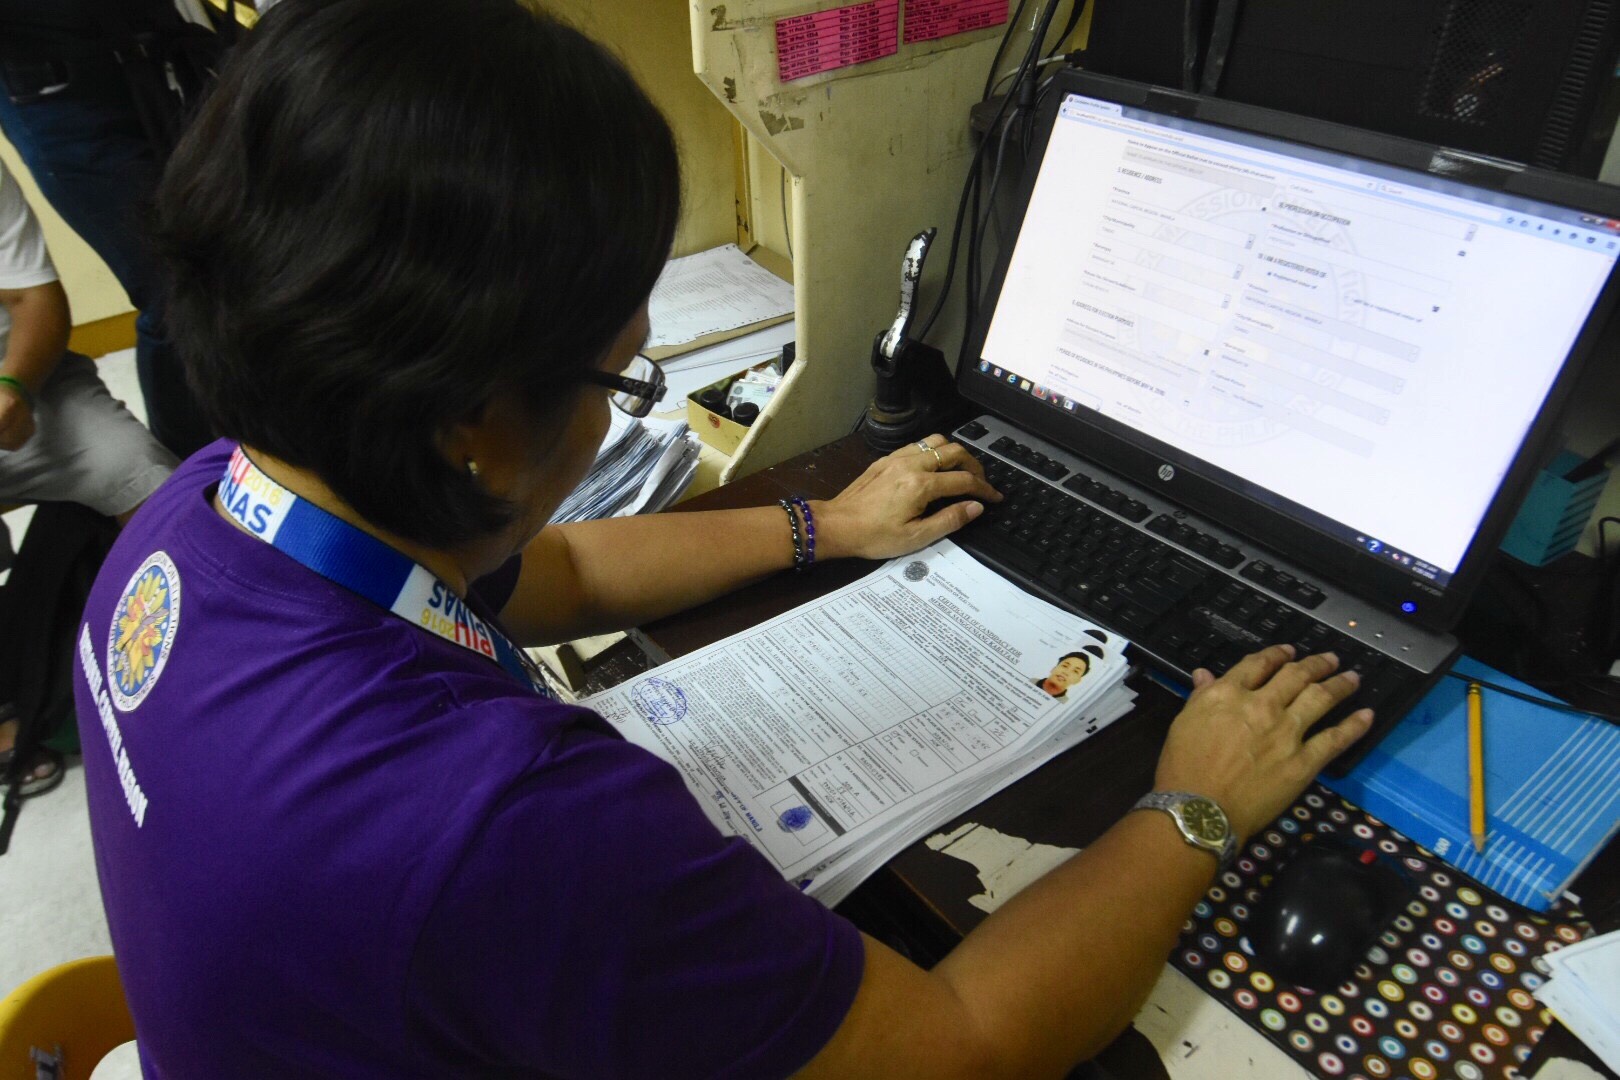 COC FILING. A staff member of Comelec Manila encodes the certificates of candidacy they received on April 20, 2018, for the May 14 barangay and SK elections. File photo by Angie de Silva/Rappler  